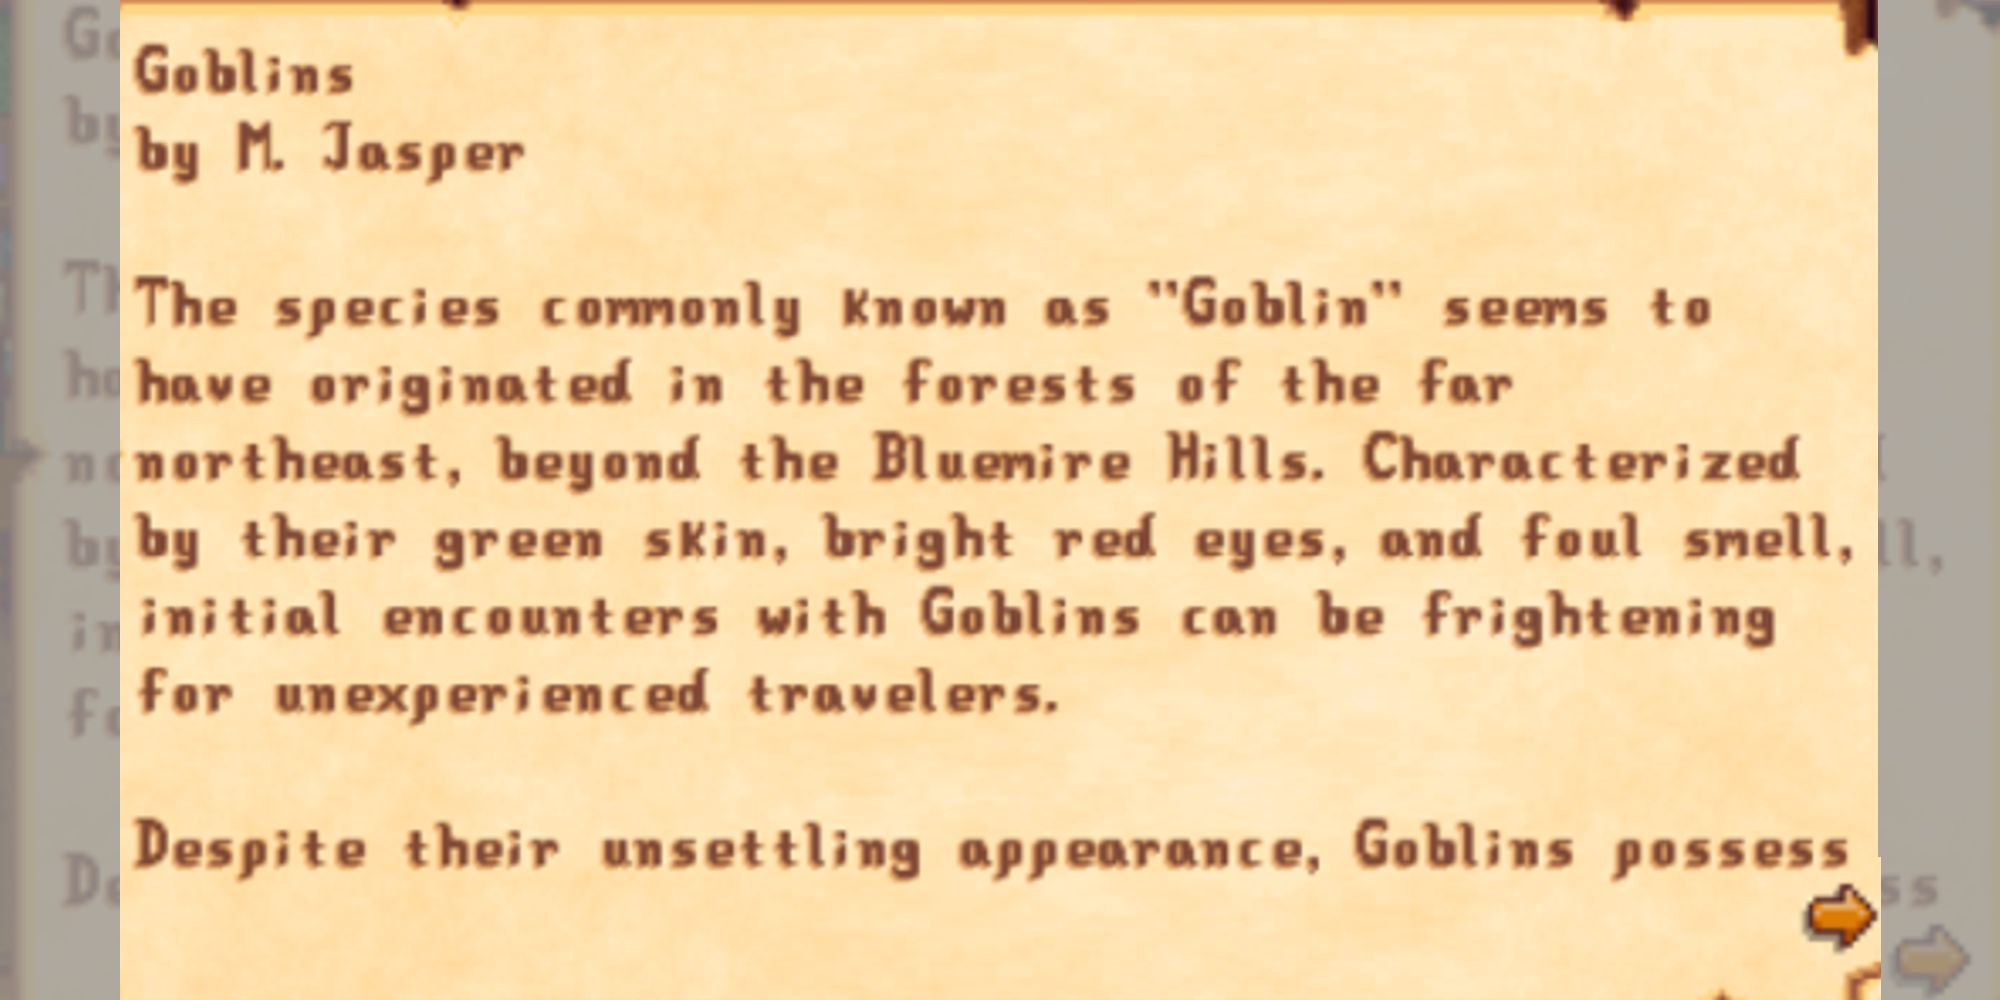 beginning of book about goblins by m. jasper